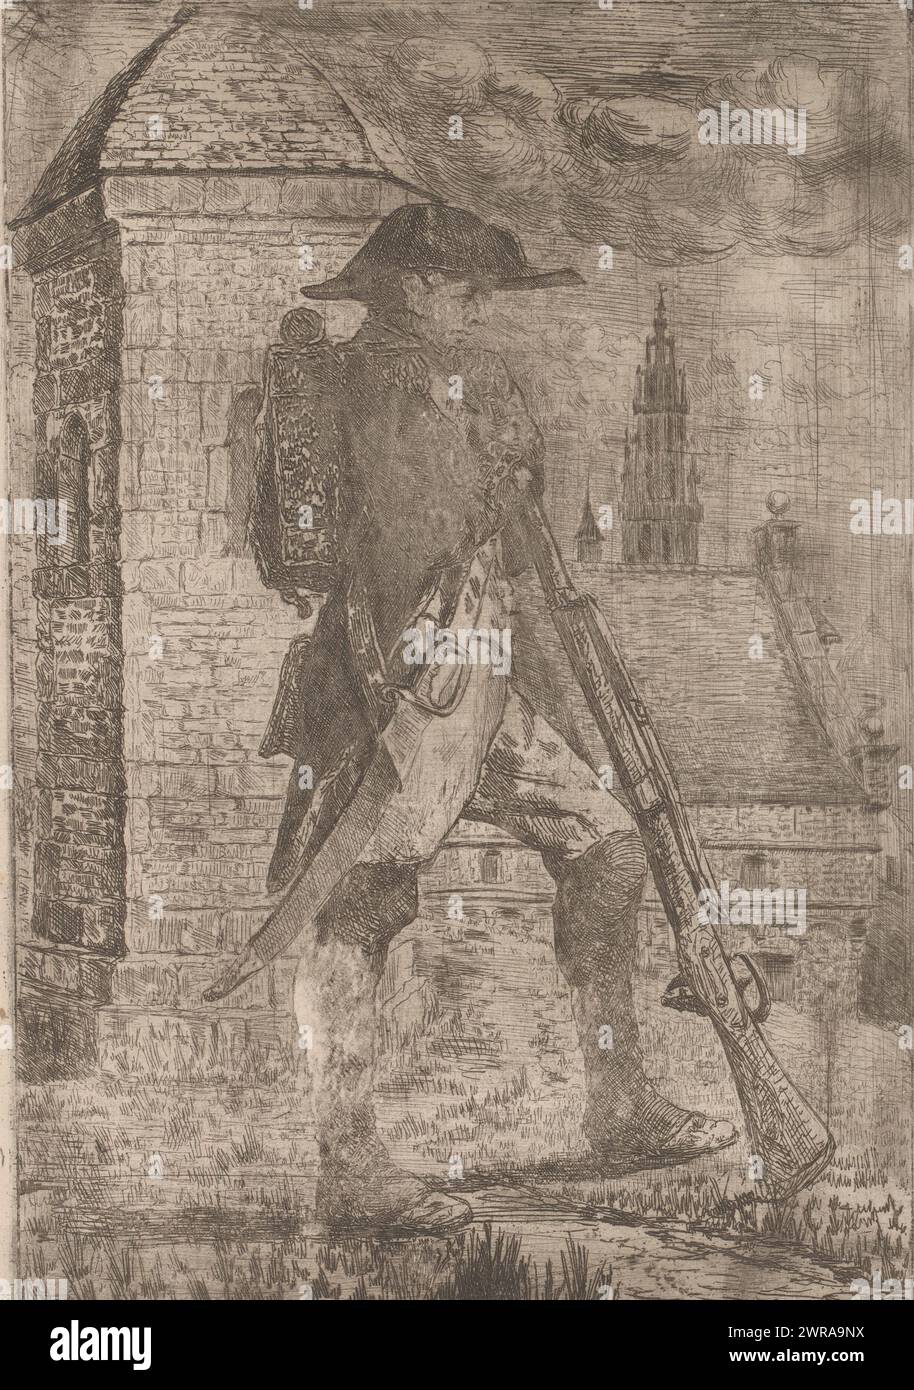 Sentinel, print maker: Edouard Tyck, 1857 - 1913, paper, etching, drypoint, height 291 mm × width 197 mm, print Stock Photo